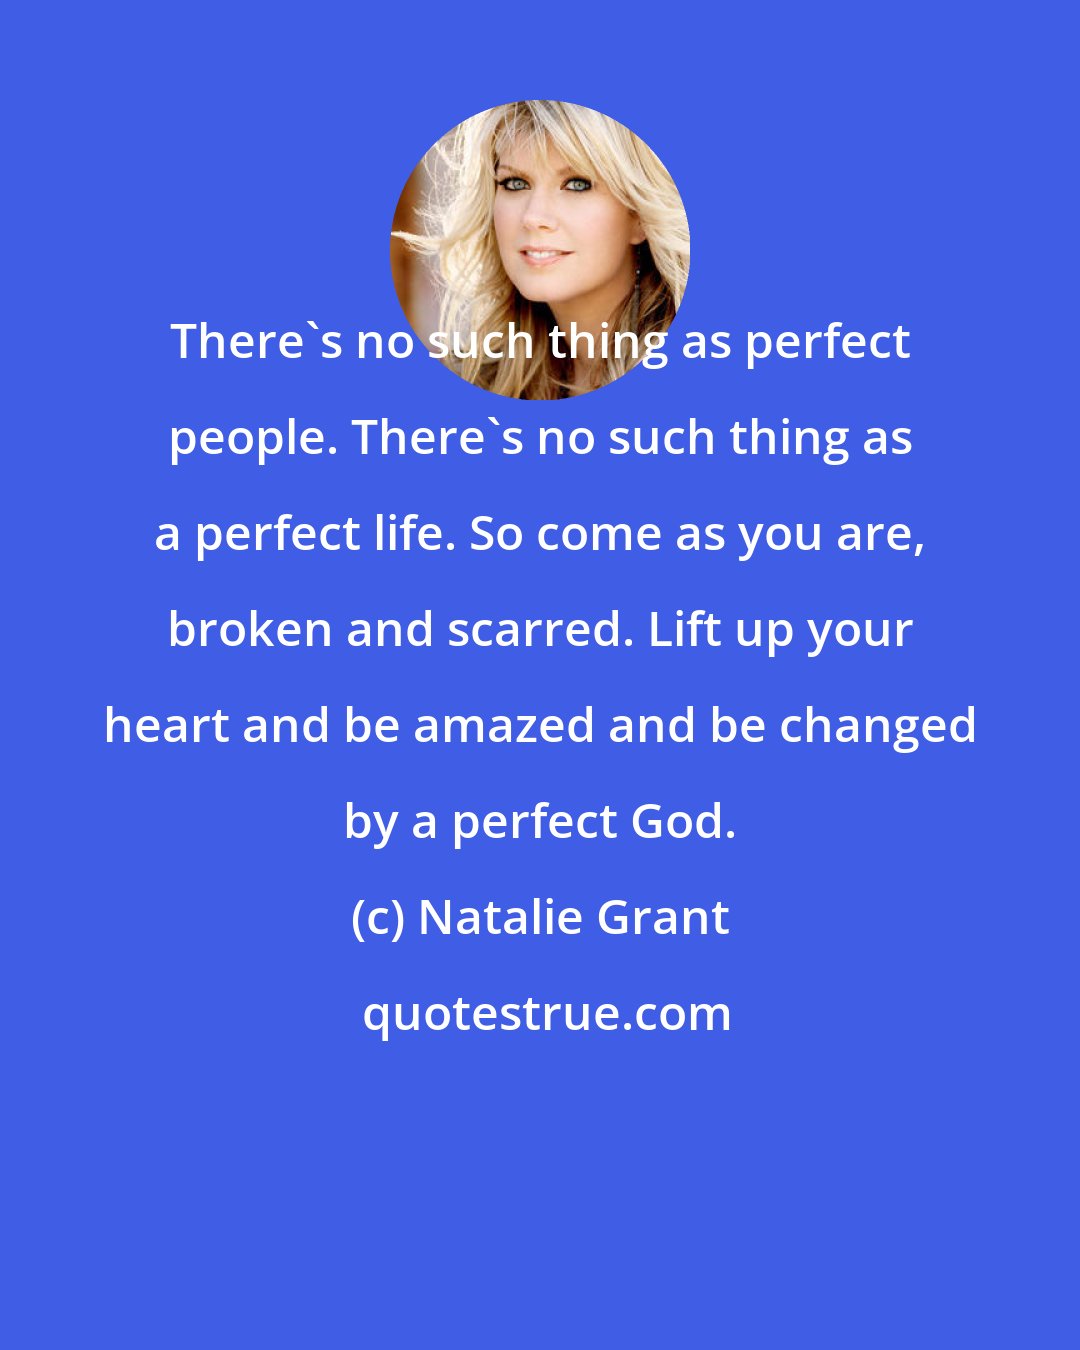 Natalie Grant: There's no such thing as perfect people. There's no such thing as a perfect life. So come as you are, broken and scarred. Lift up your heart and be amazed and be changed by a perfect God.